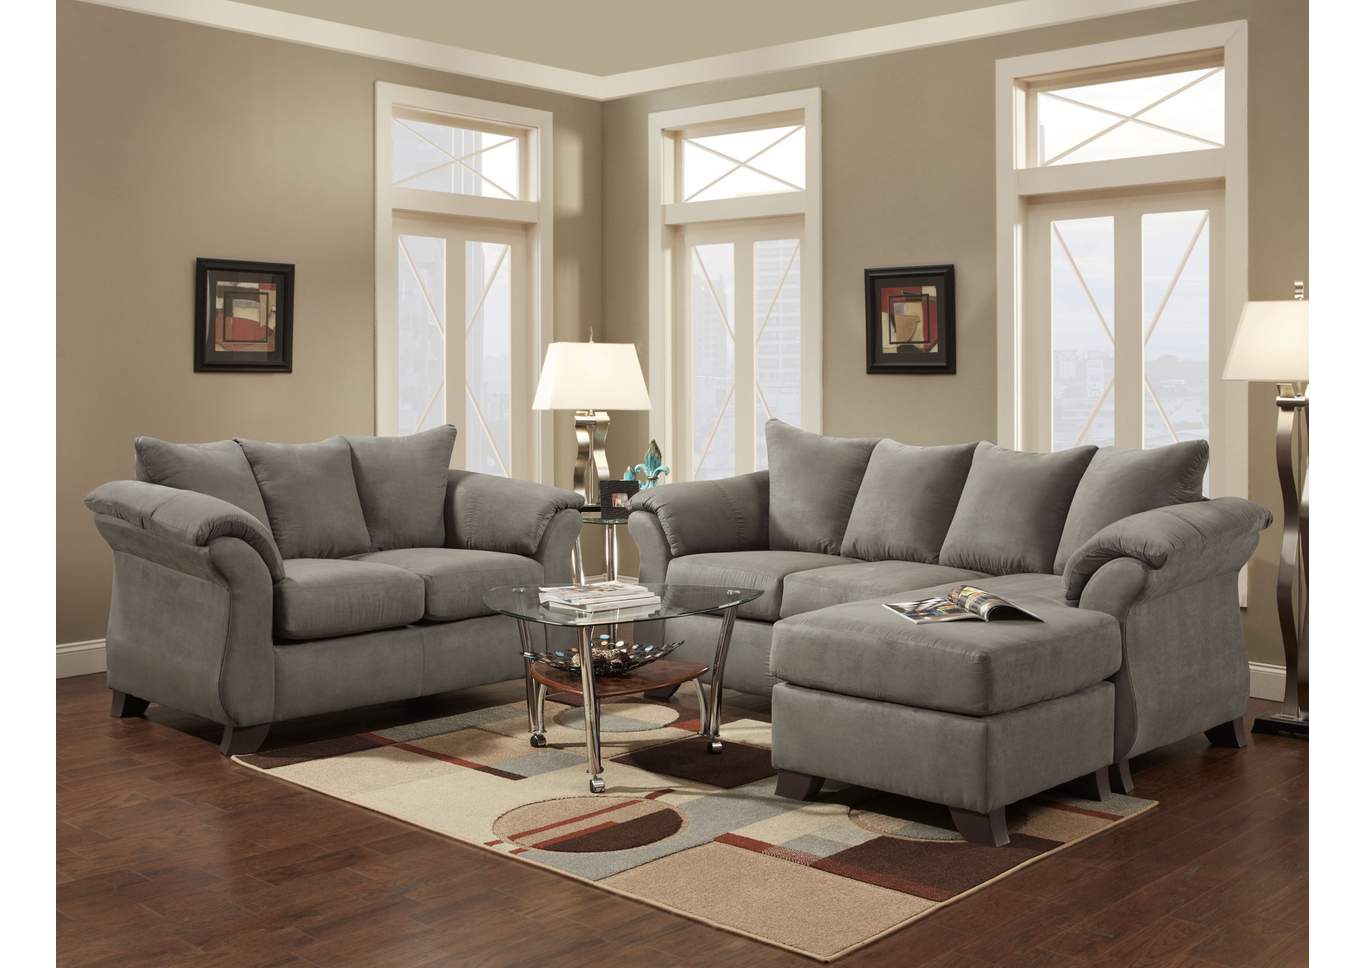 Sensations Grey Sofa W/Chaise,Affordable Furniture